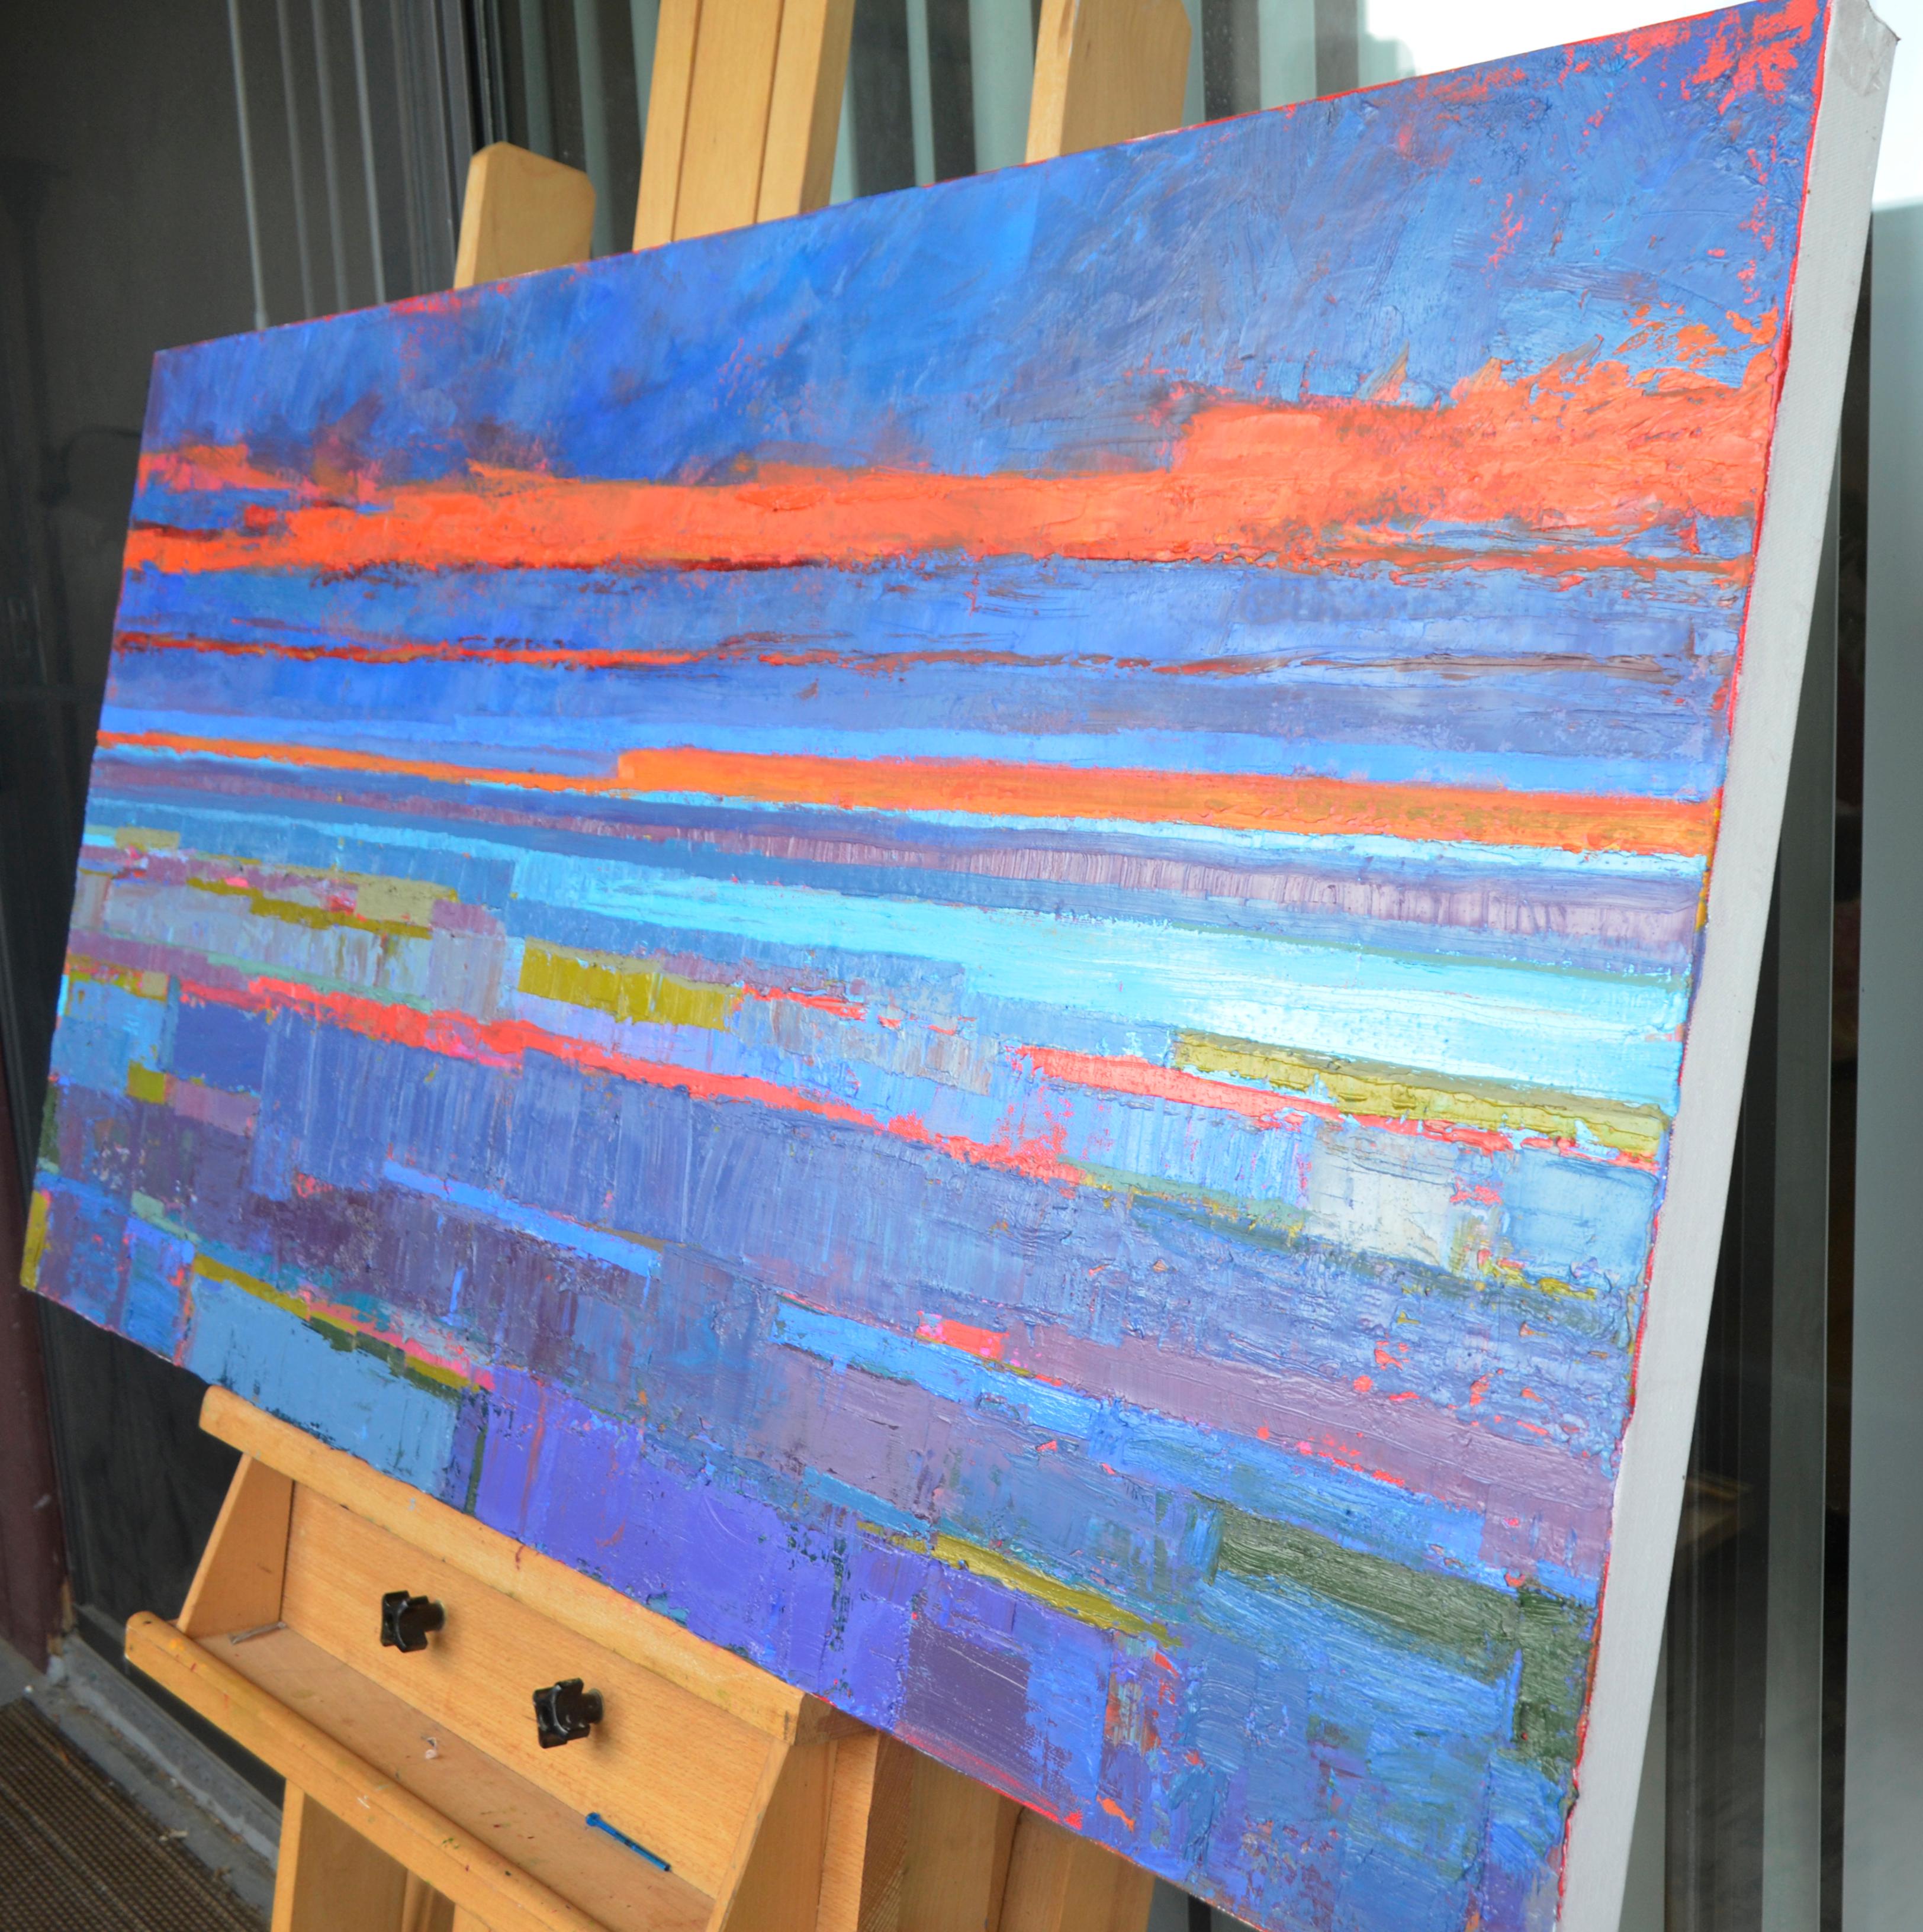 <p>Artist Comments<br />Abstracted landscape just after sunset marked by brilliant orange and red clouds in the dark blue background. Layers of blues, purples, greens and orange in horizontal stripes and blocks. Fields in the foreground and a body